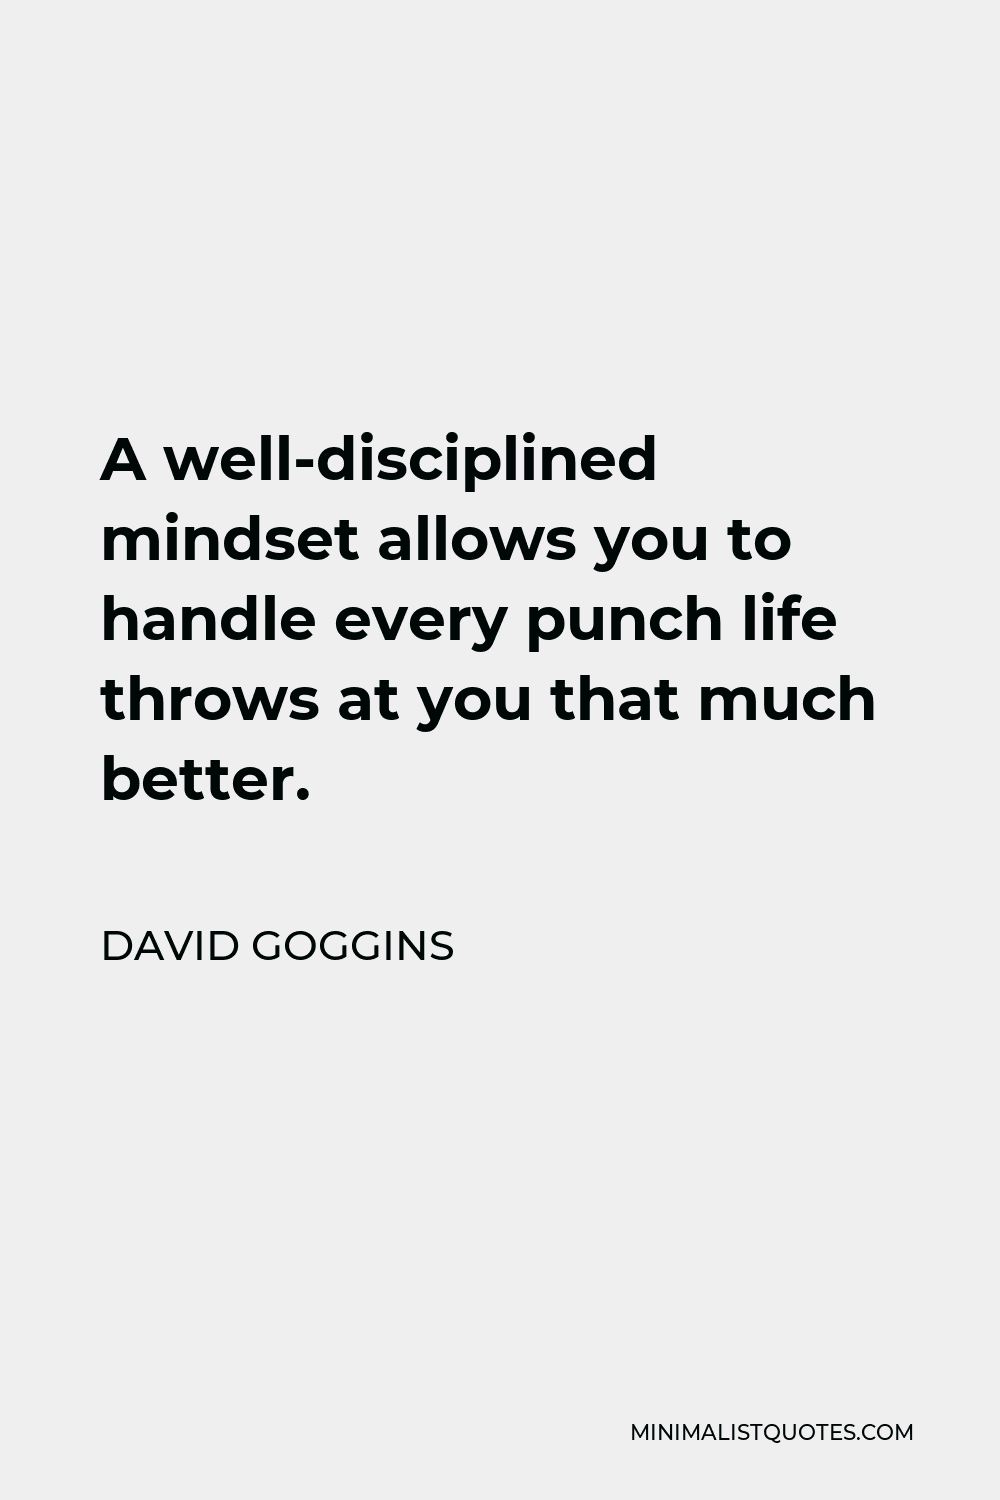 David Goggins Quote - A well-disciplined mindset allows you to handle every punch life throws at you that much better.